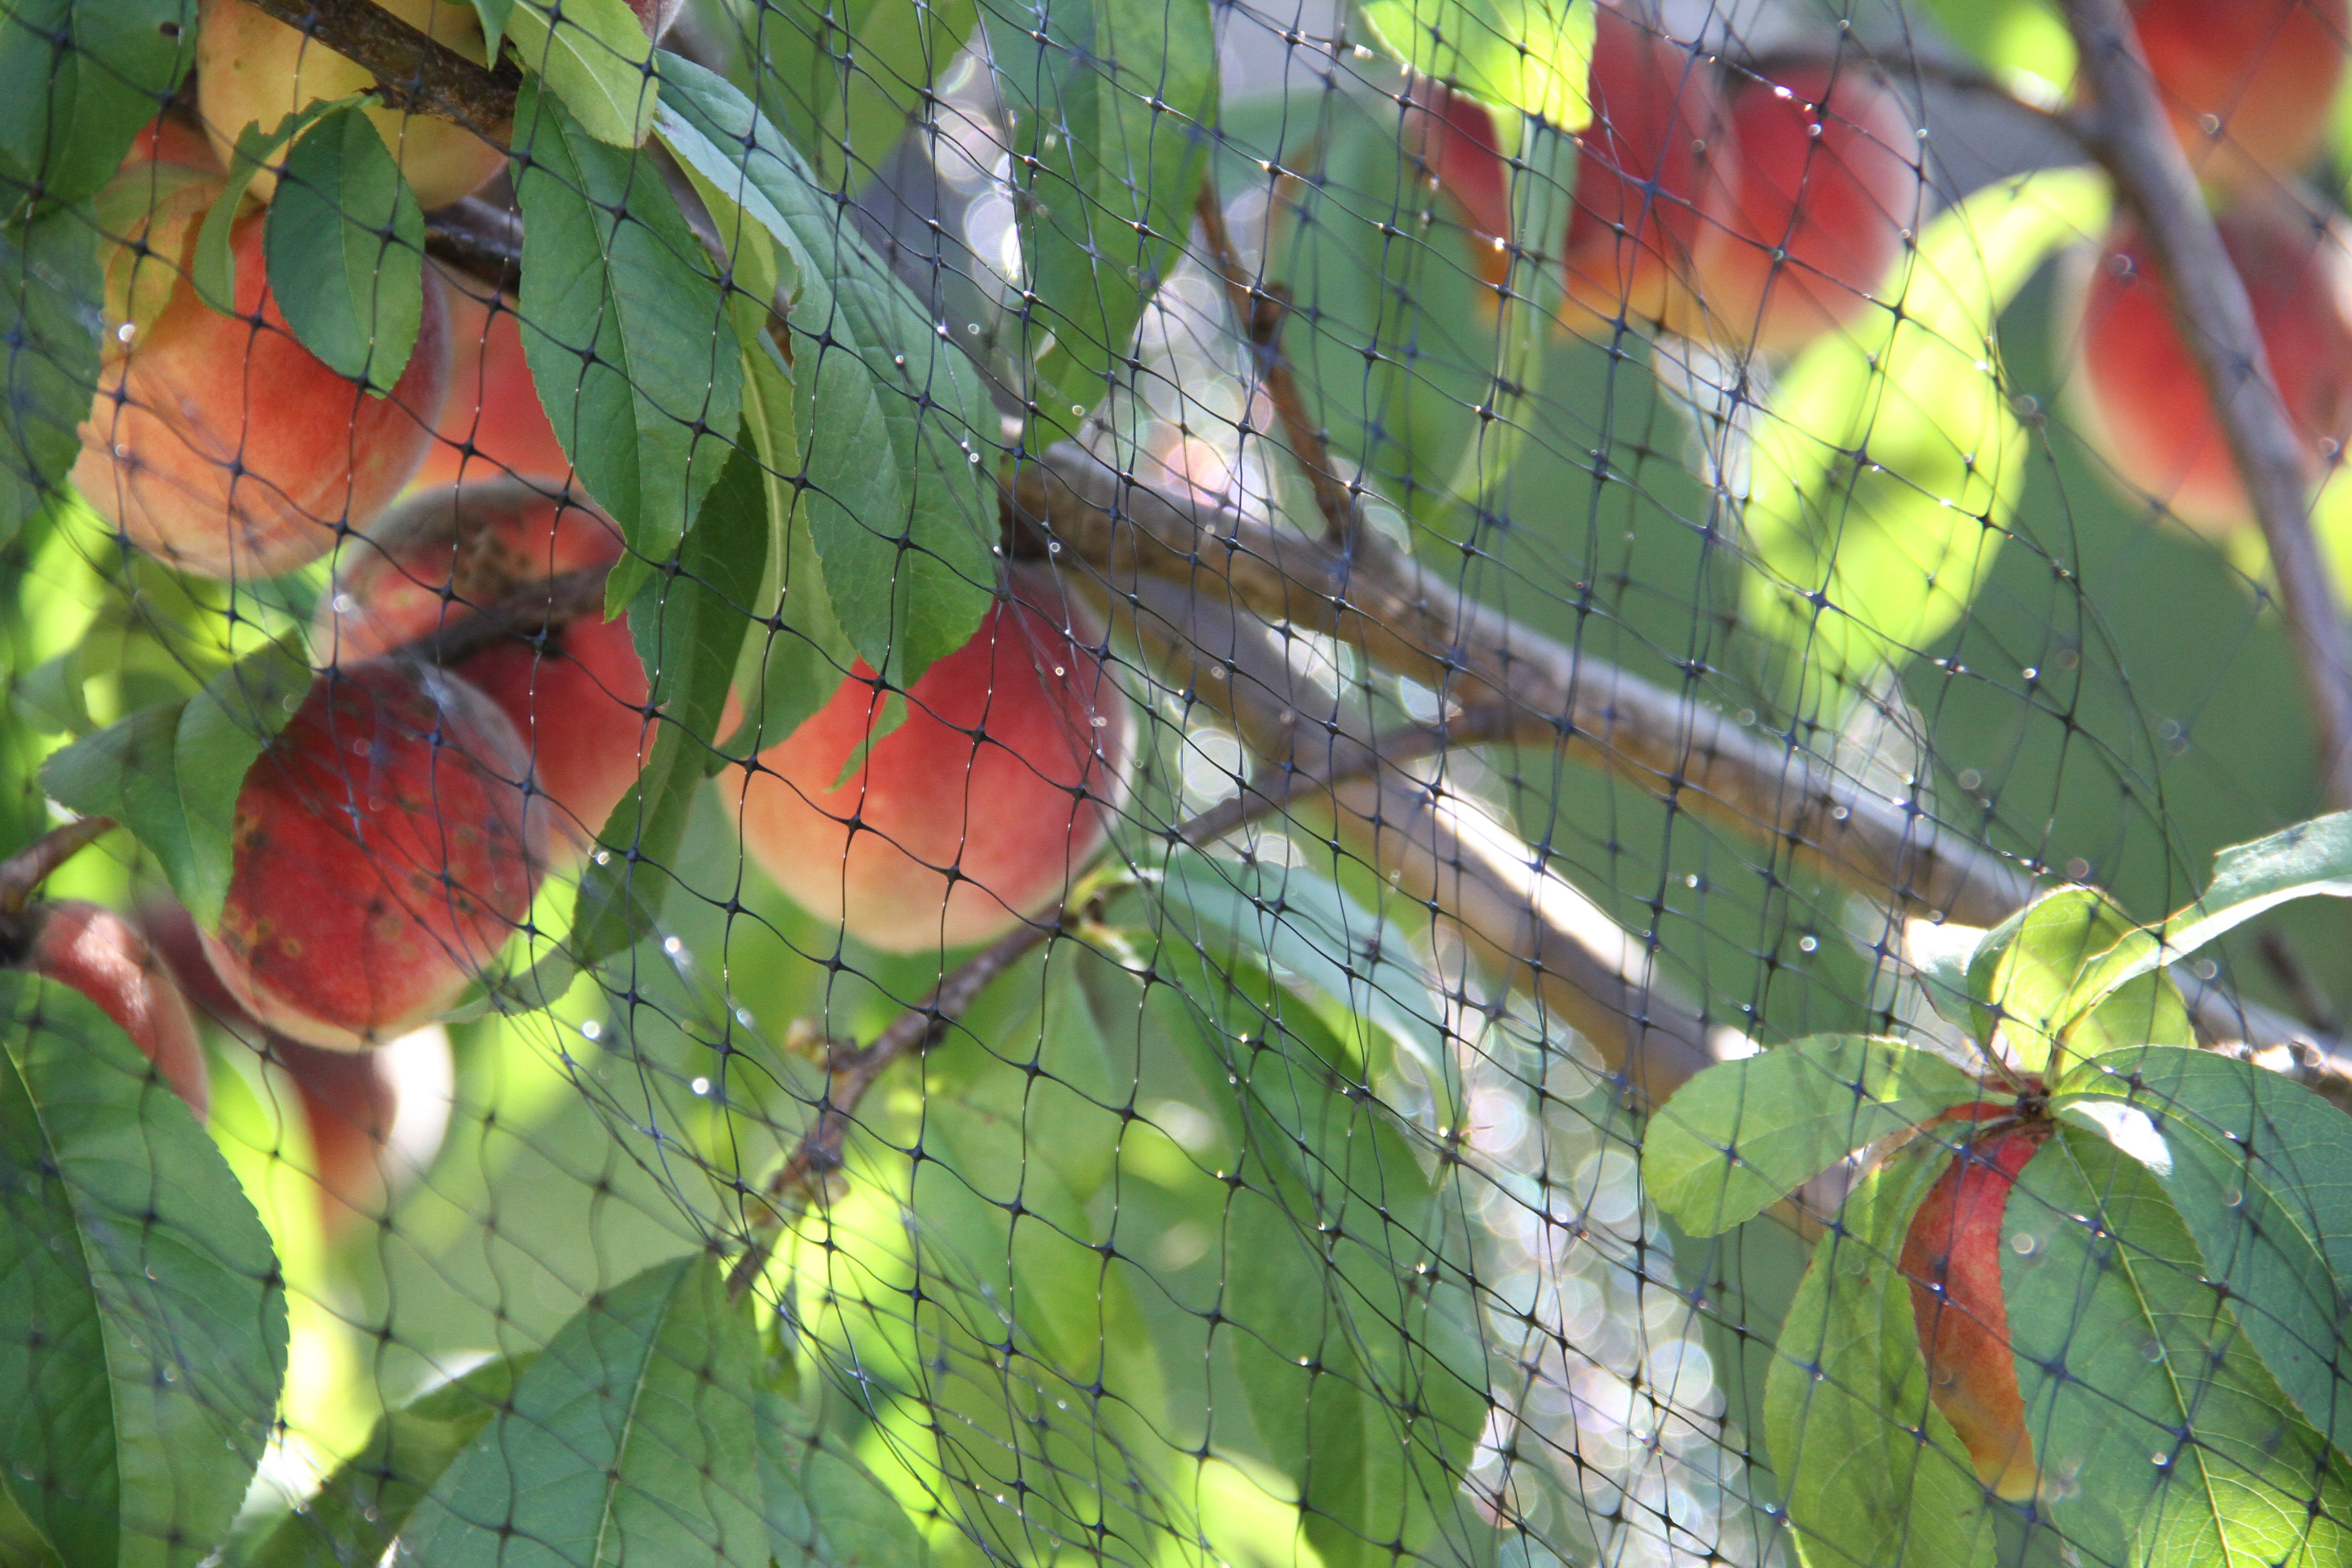 Beauty shot: Mr K's peaches, lovingly wrapped in netting to keep the pests away.